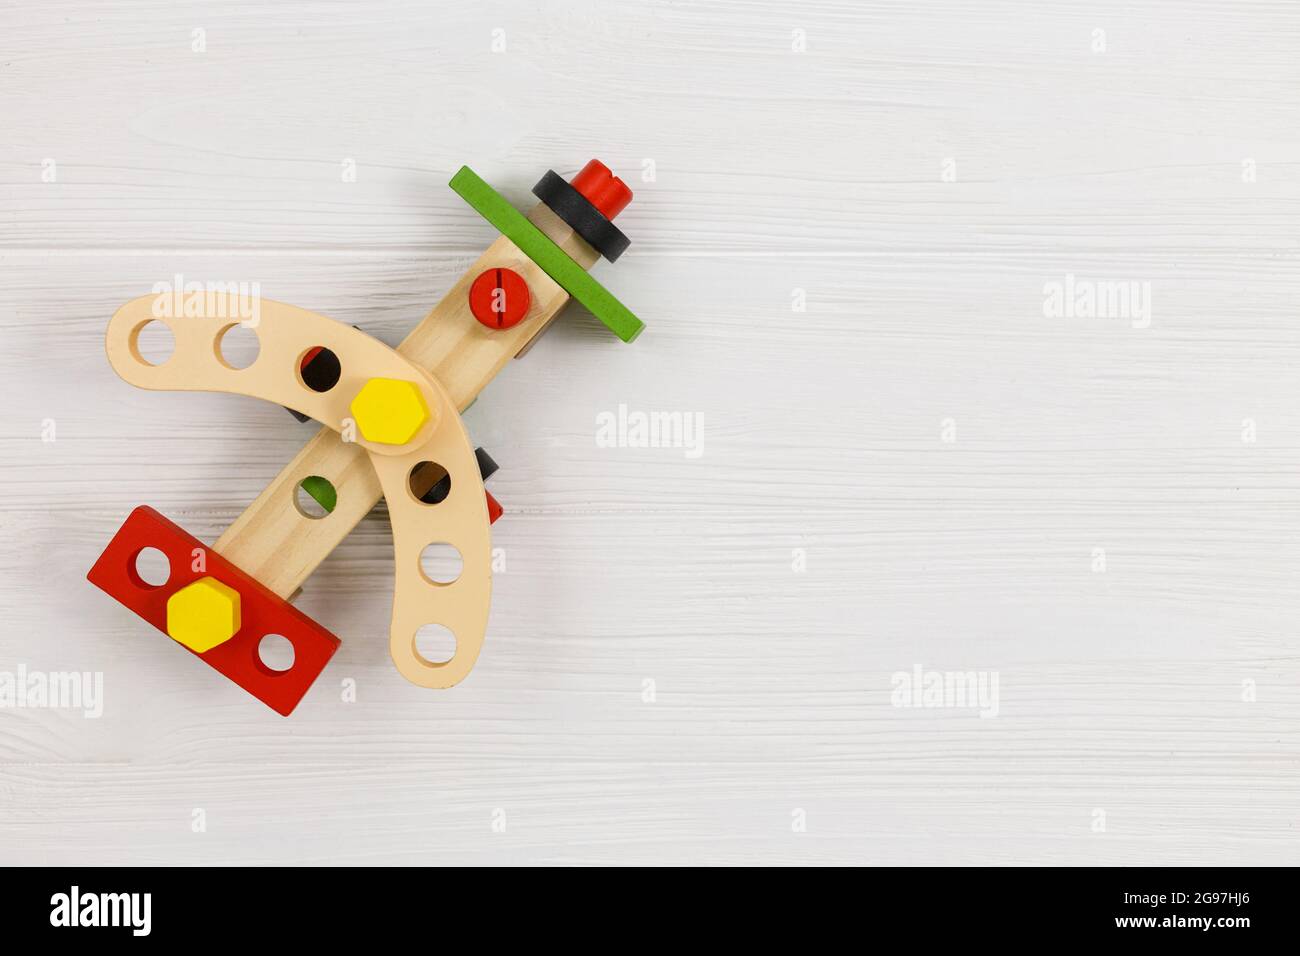 A colorful wooden building kit, plane for children on wood. Set of tools on white wooden table. Games and tools for kids in kindergarten, preschool Stock Photo